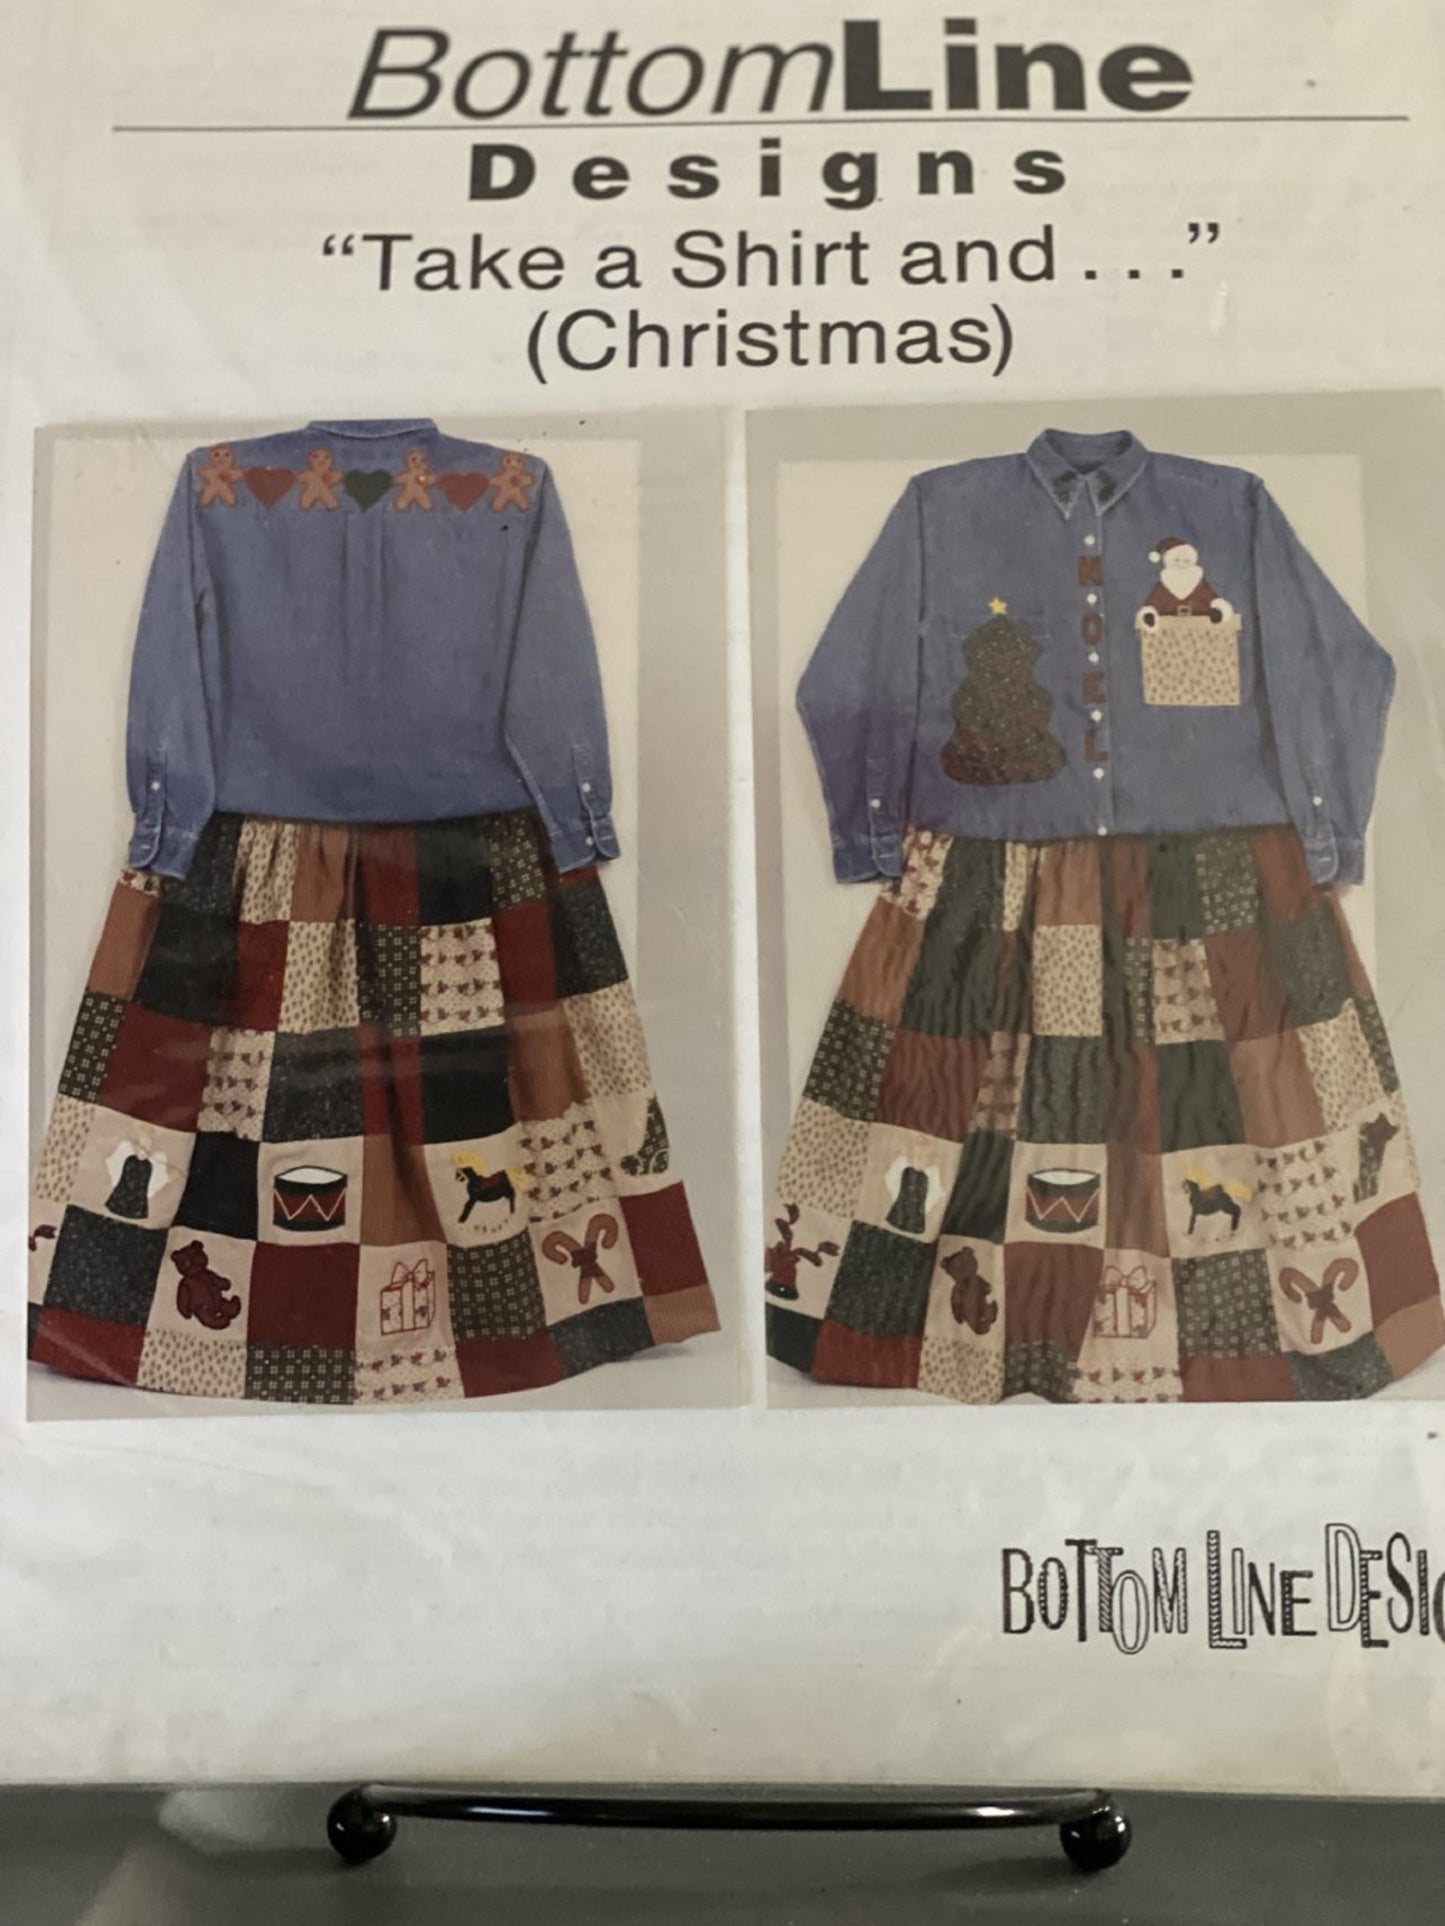 Take & Shirt and...Christmas Pattern by Bottom Line Designs